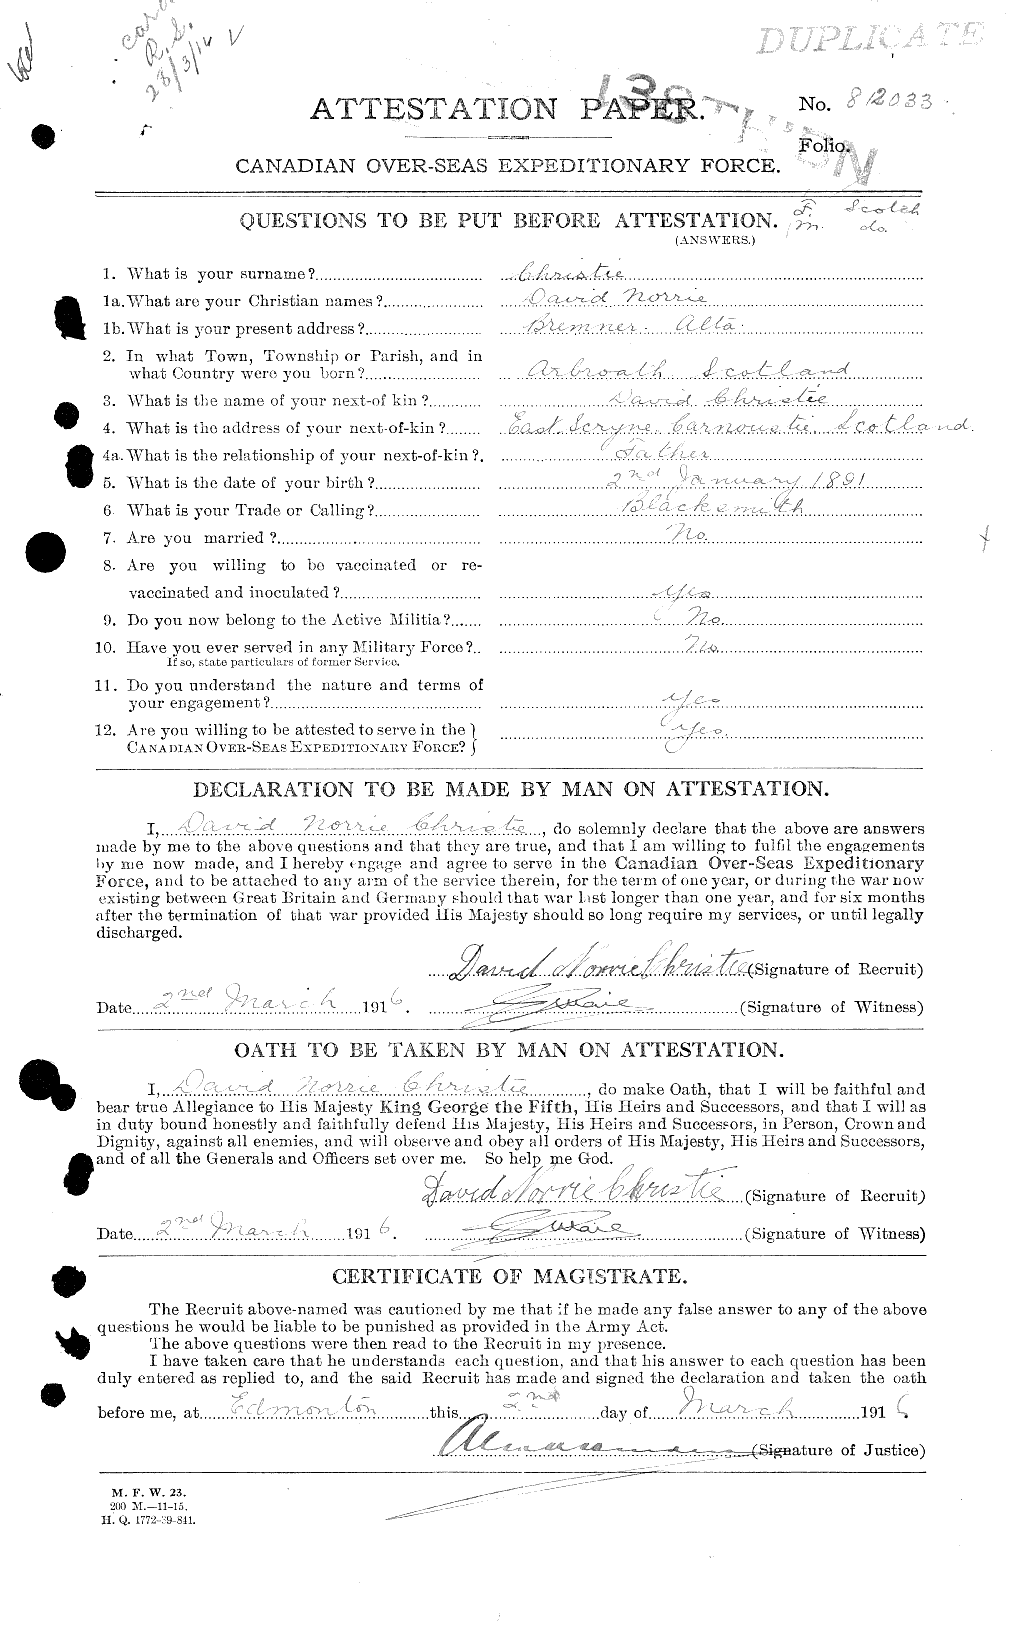 Personnel Records of the First World War - CEF 021908a